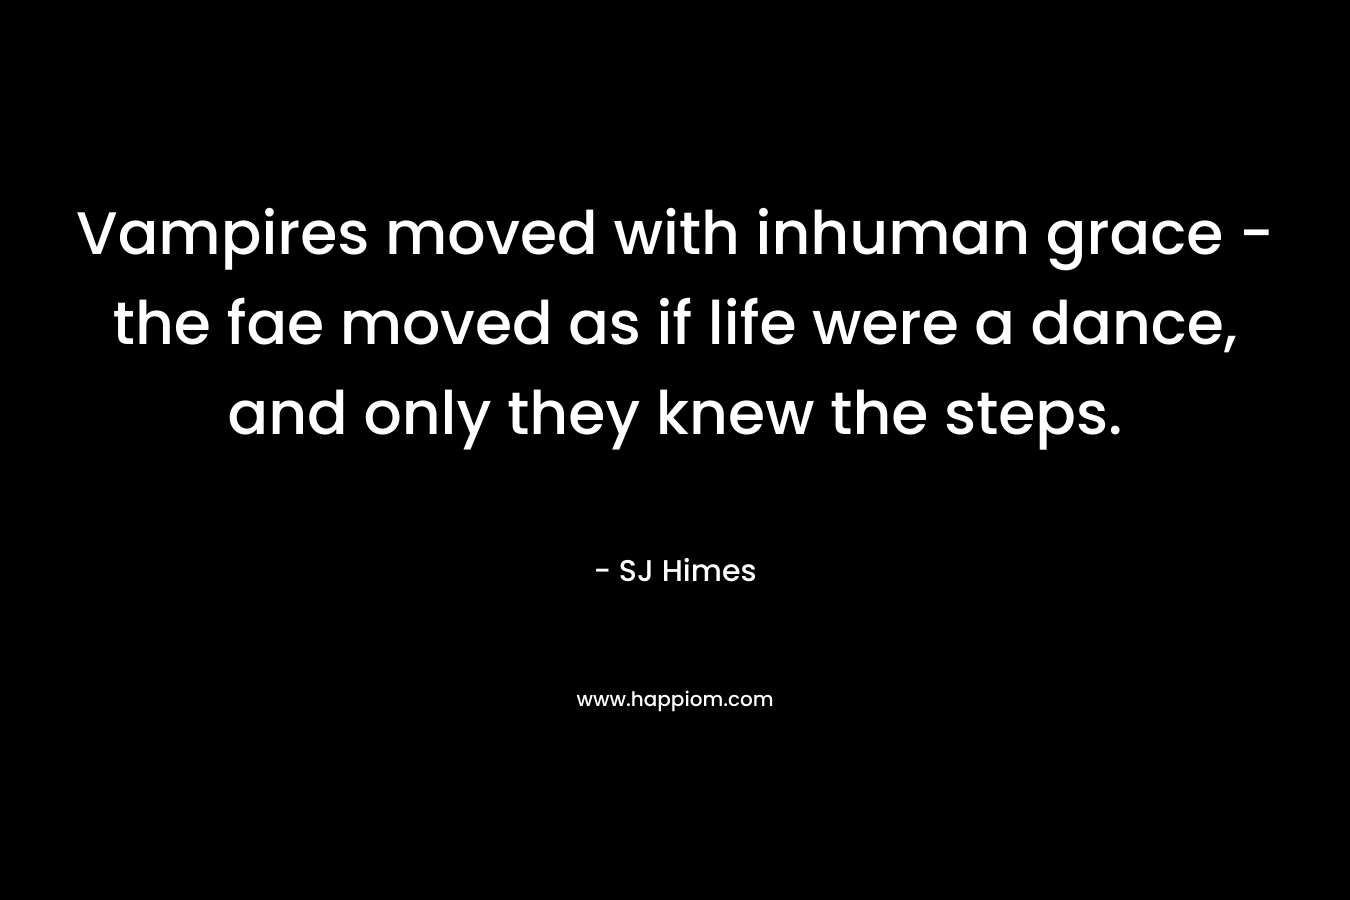 Vampires moved with inhuman grace - the fae moved as if life were a dance, and only they knew the steps.